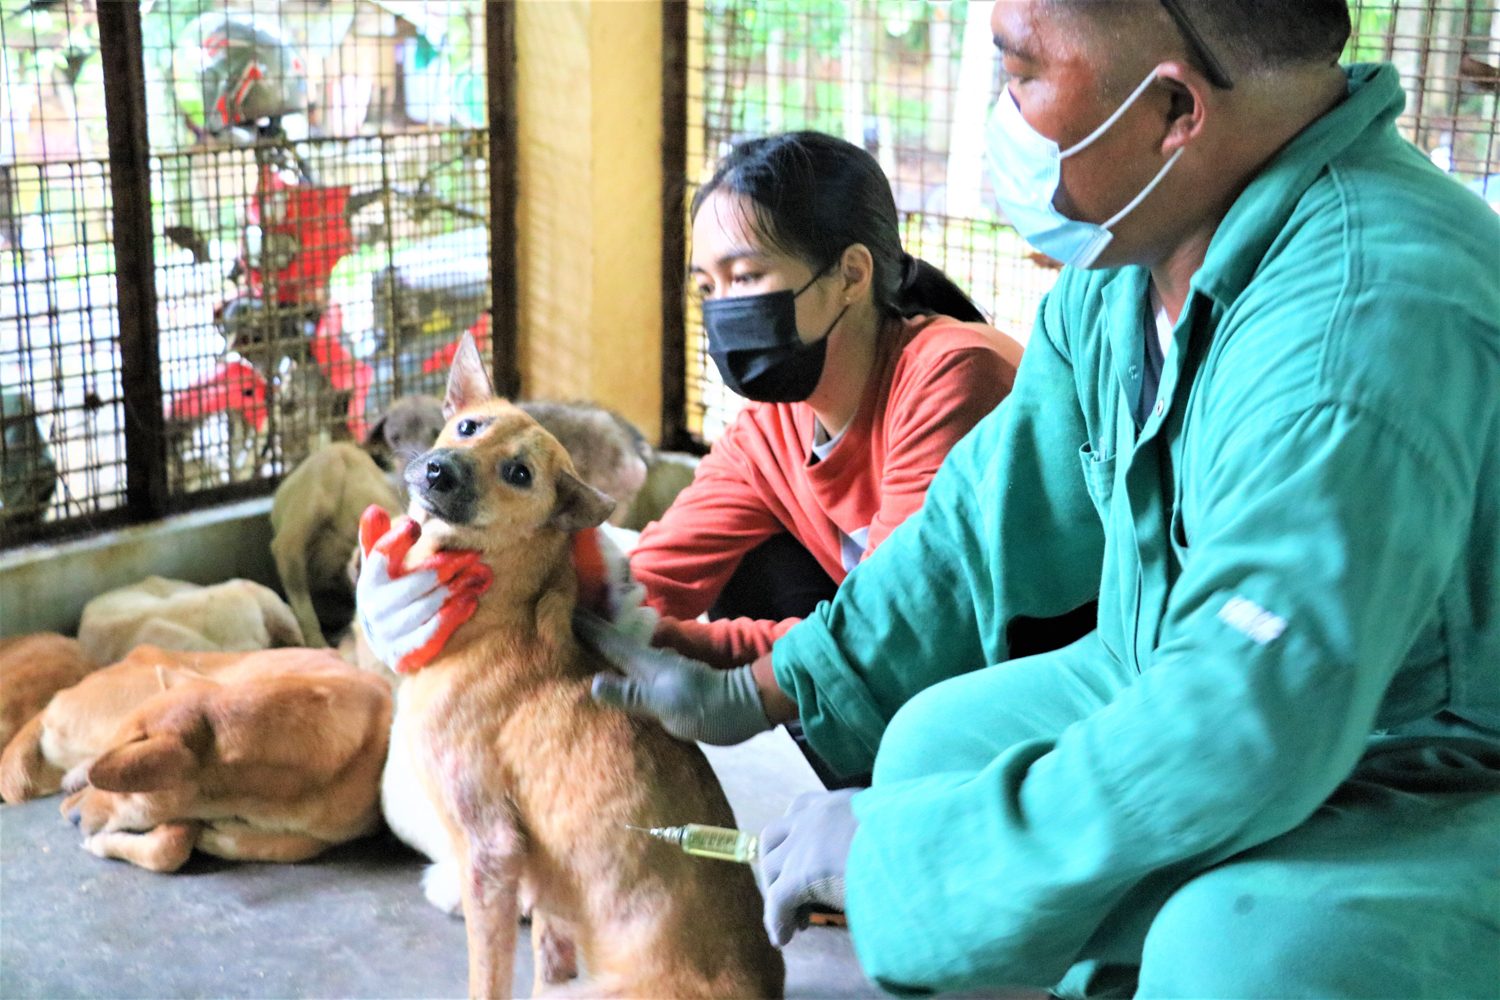 Malnourished, sickly dogs at Dipolog City Pound spark calls for responsible pet ownership